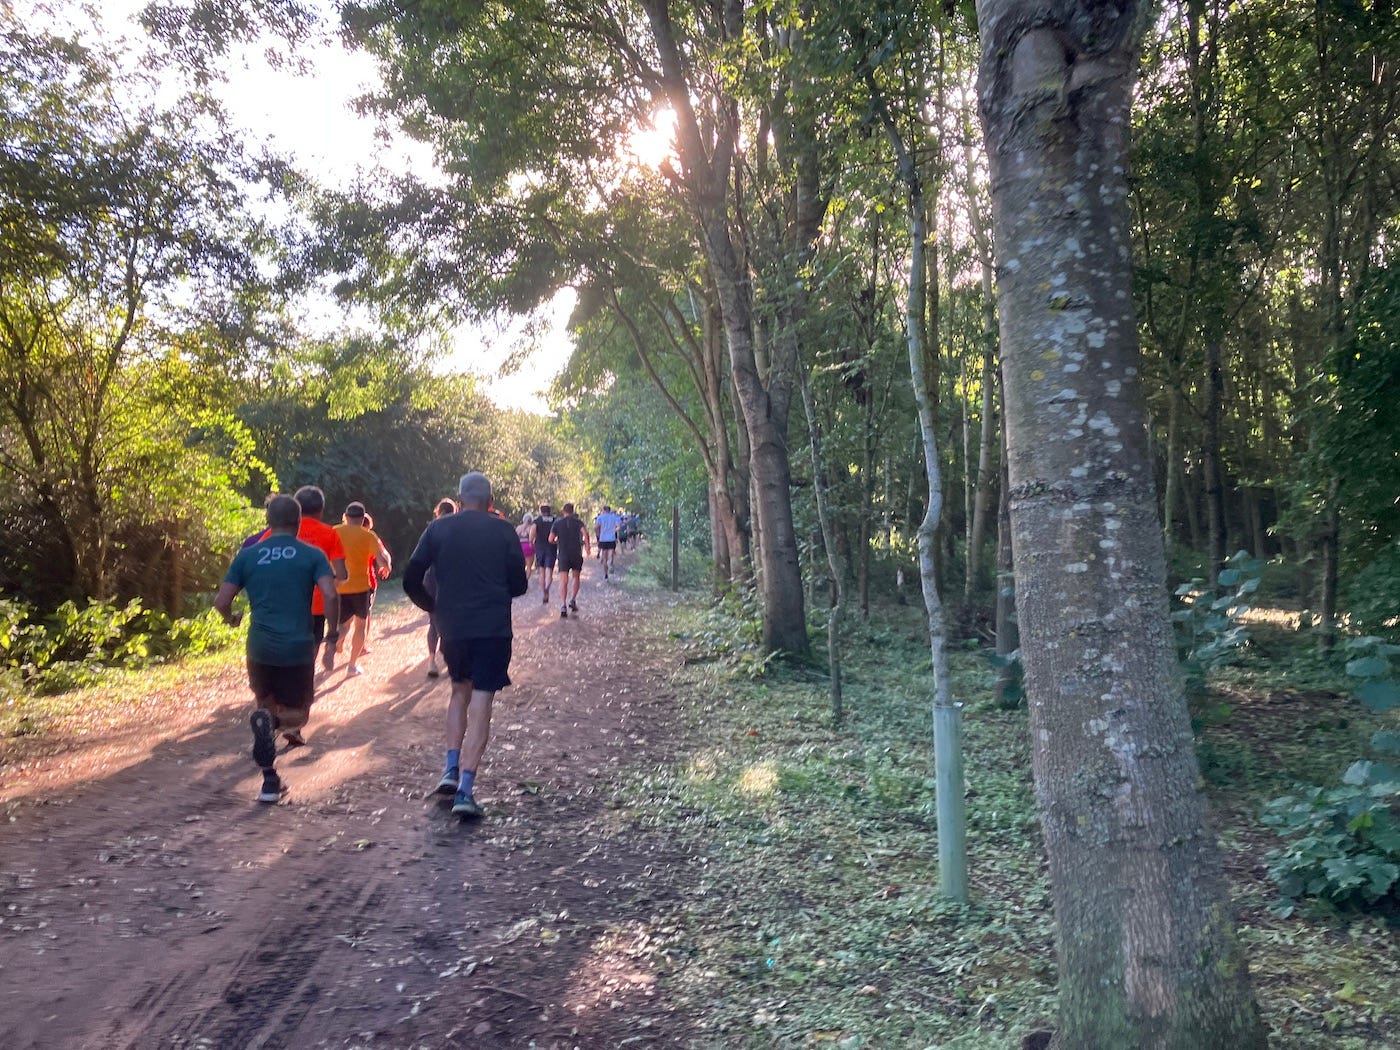 Trees line the wide path as runners move along it